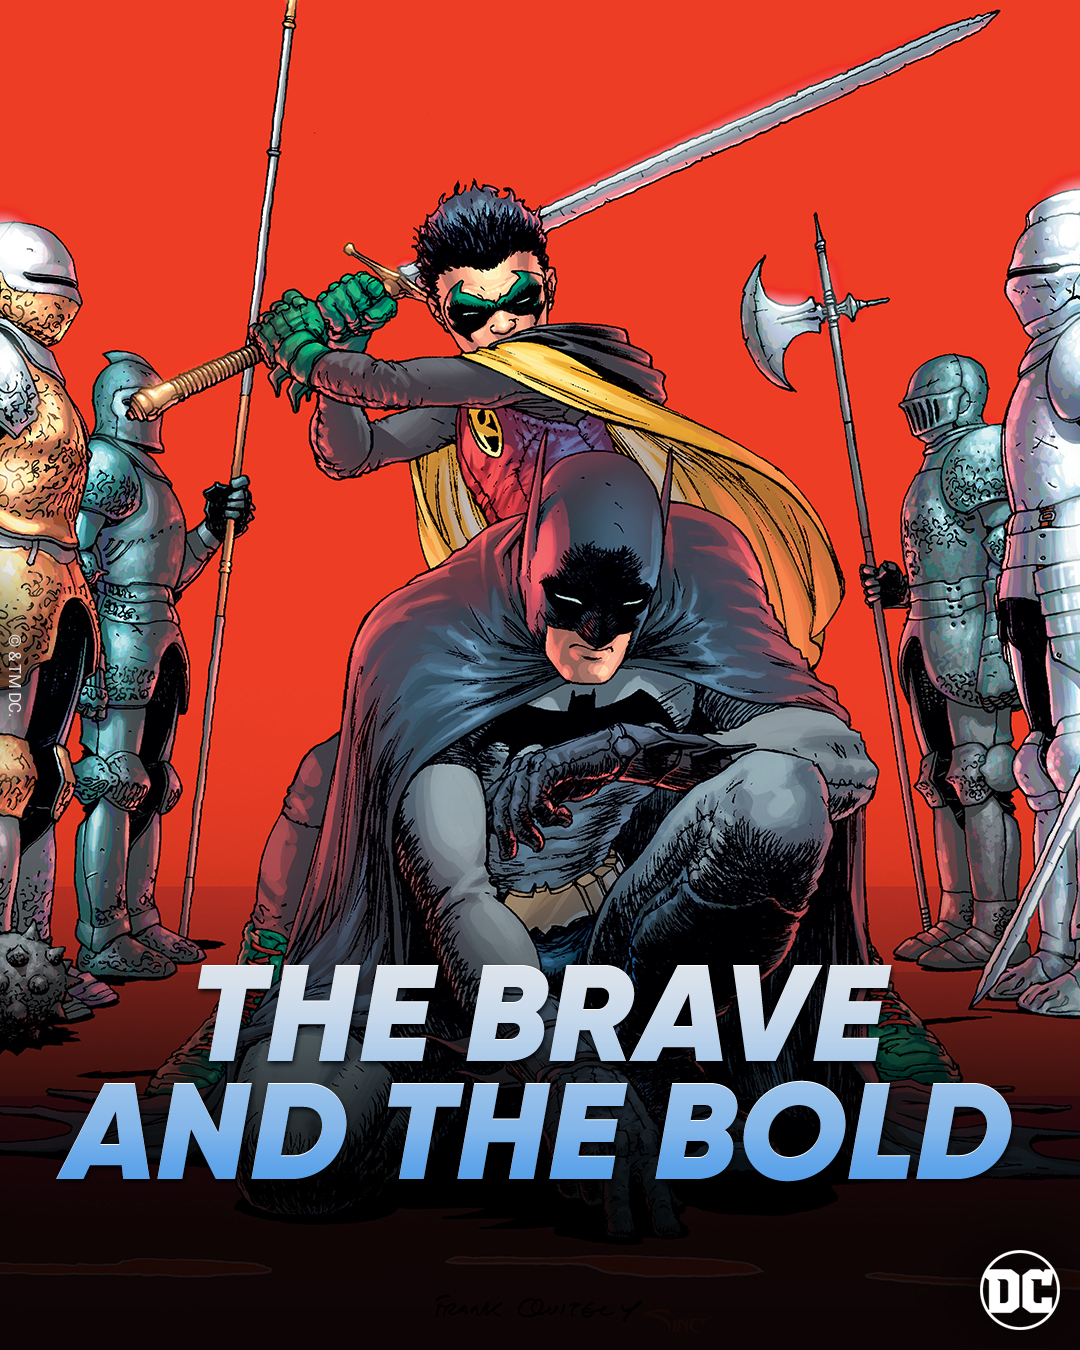 The Brave and the Bold | DC Extended Universe Wiki | Fandom